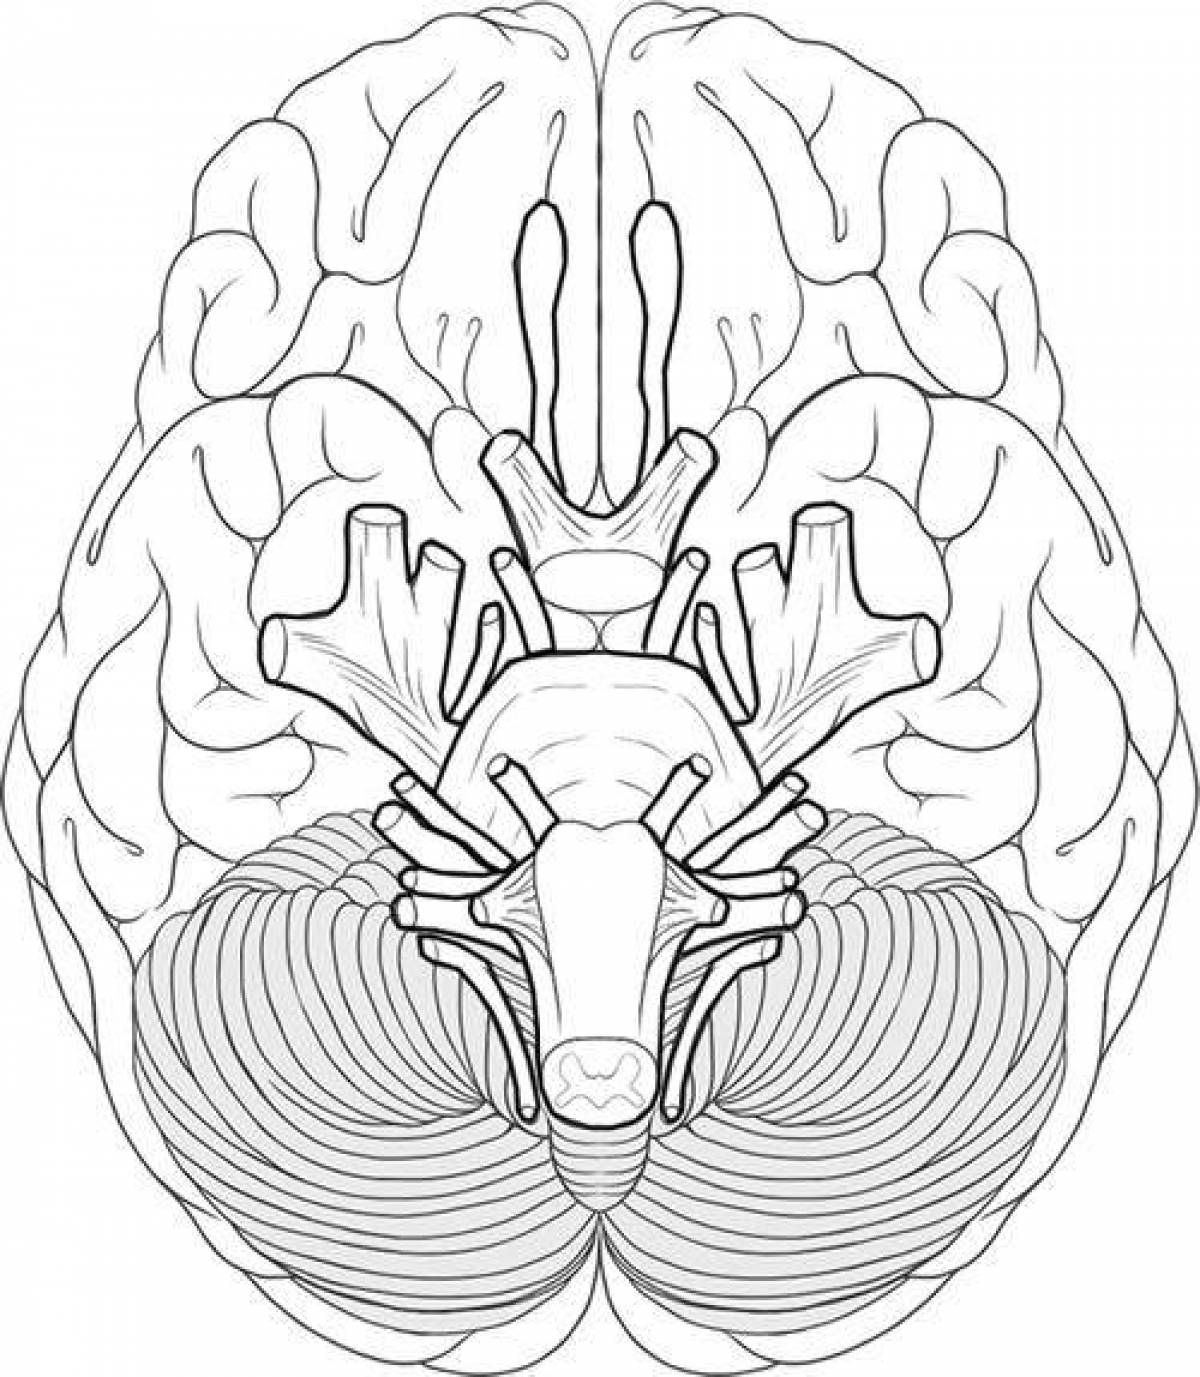 Dazzling anatomy coloring page